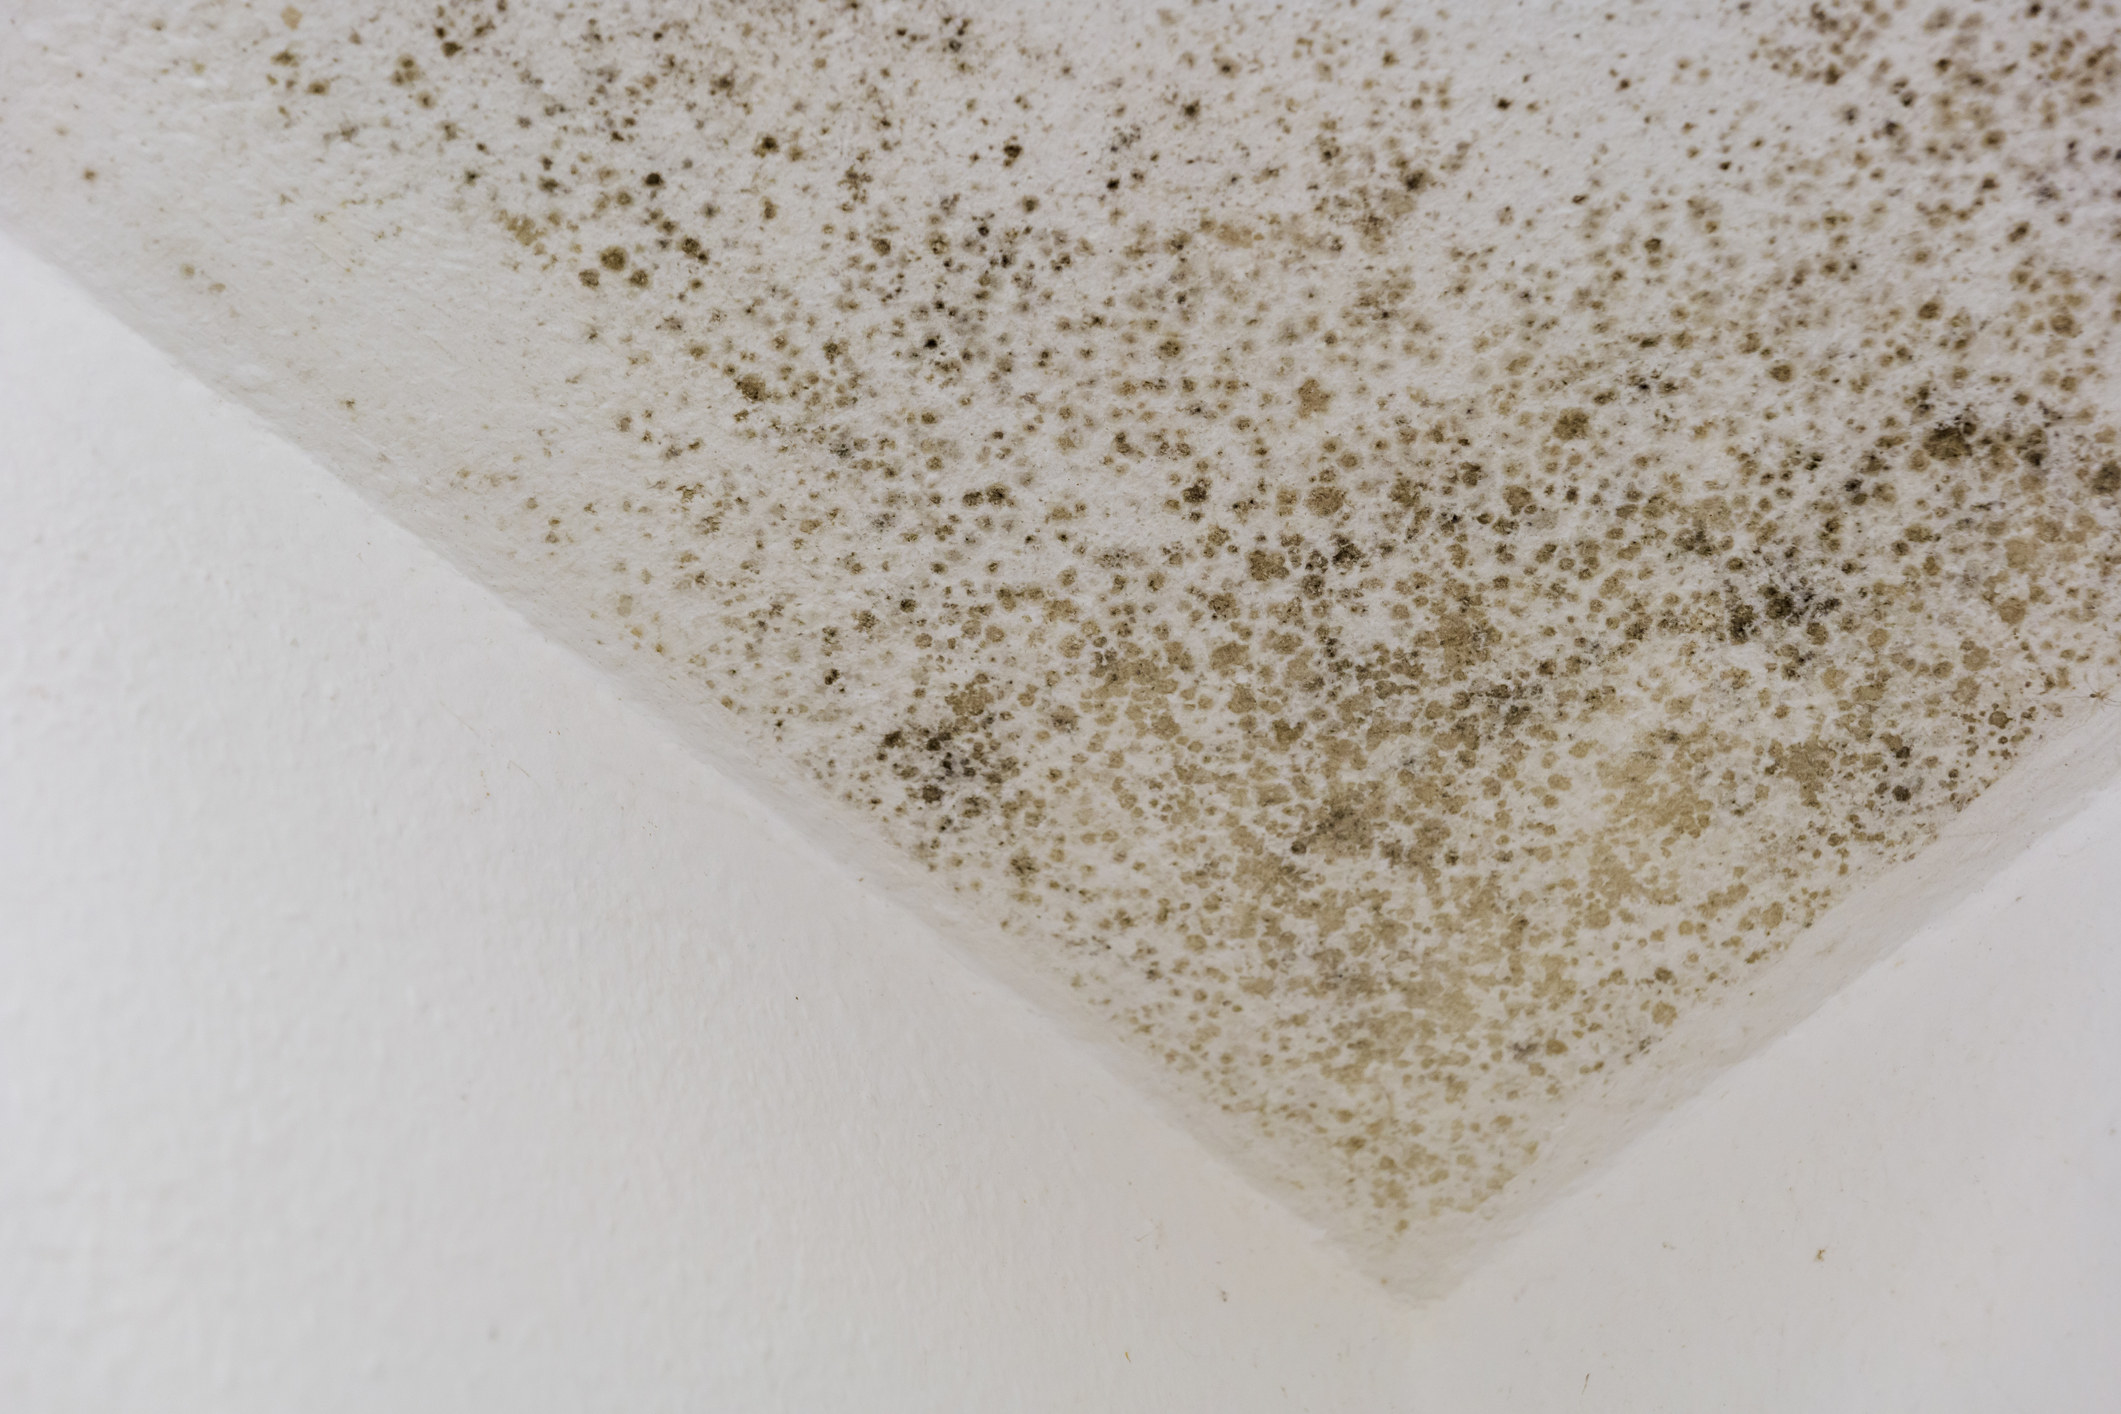 Mold growth spreading on a ceiling corner, indicating potential water damage and a need for remediation